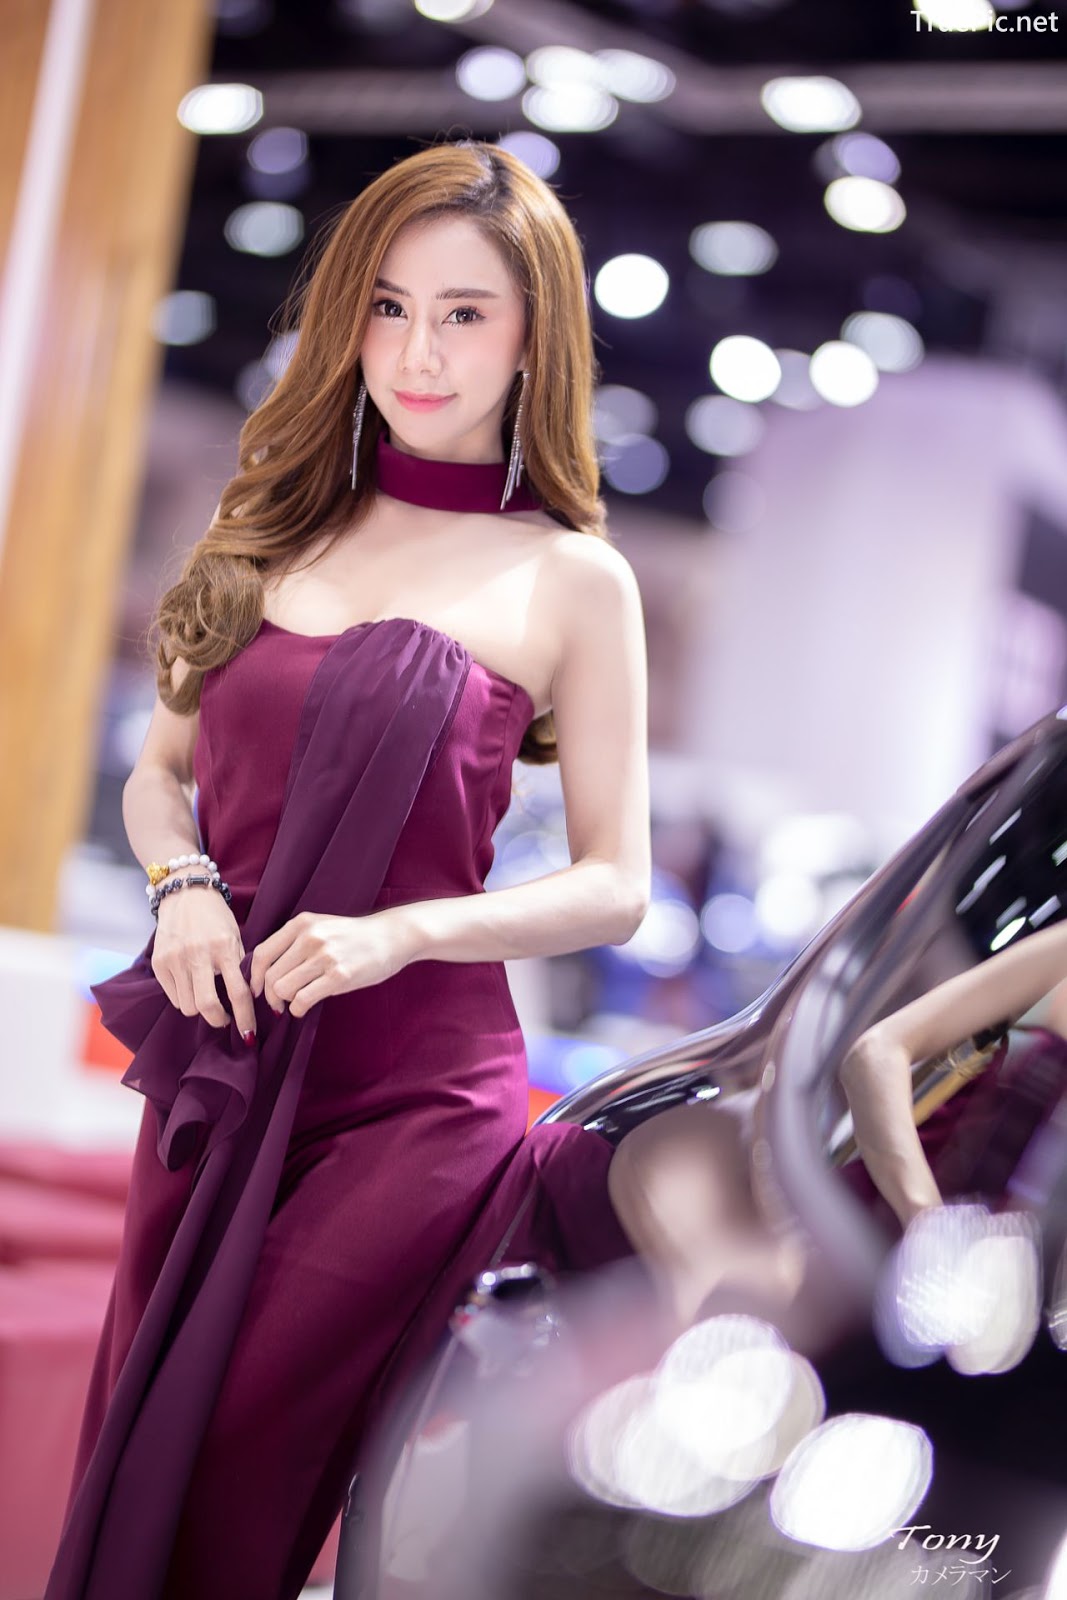 Image-Thailand-Hot-Model-Thai-Racing-Girl-At-Motor-Show-2019-TruePic.net- Picture-13